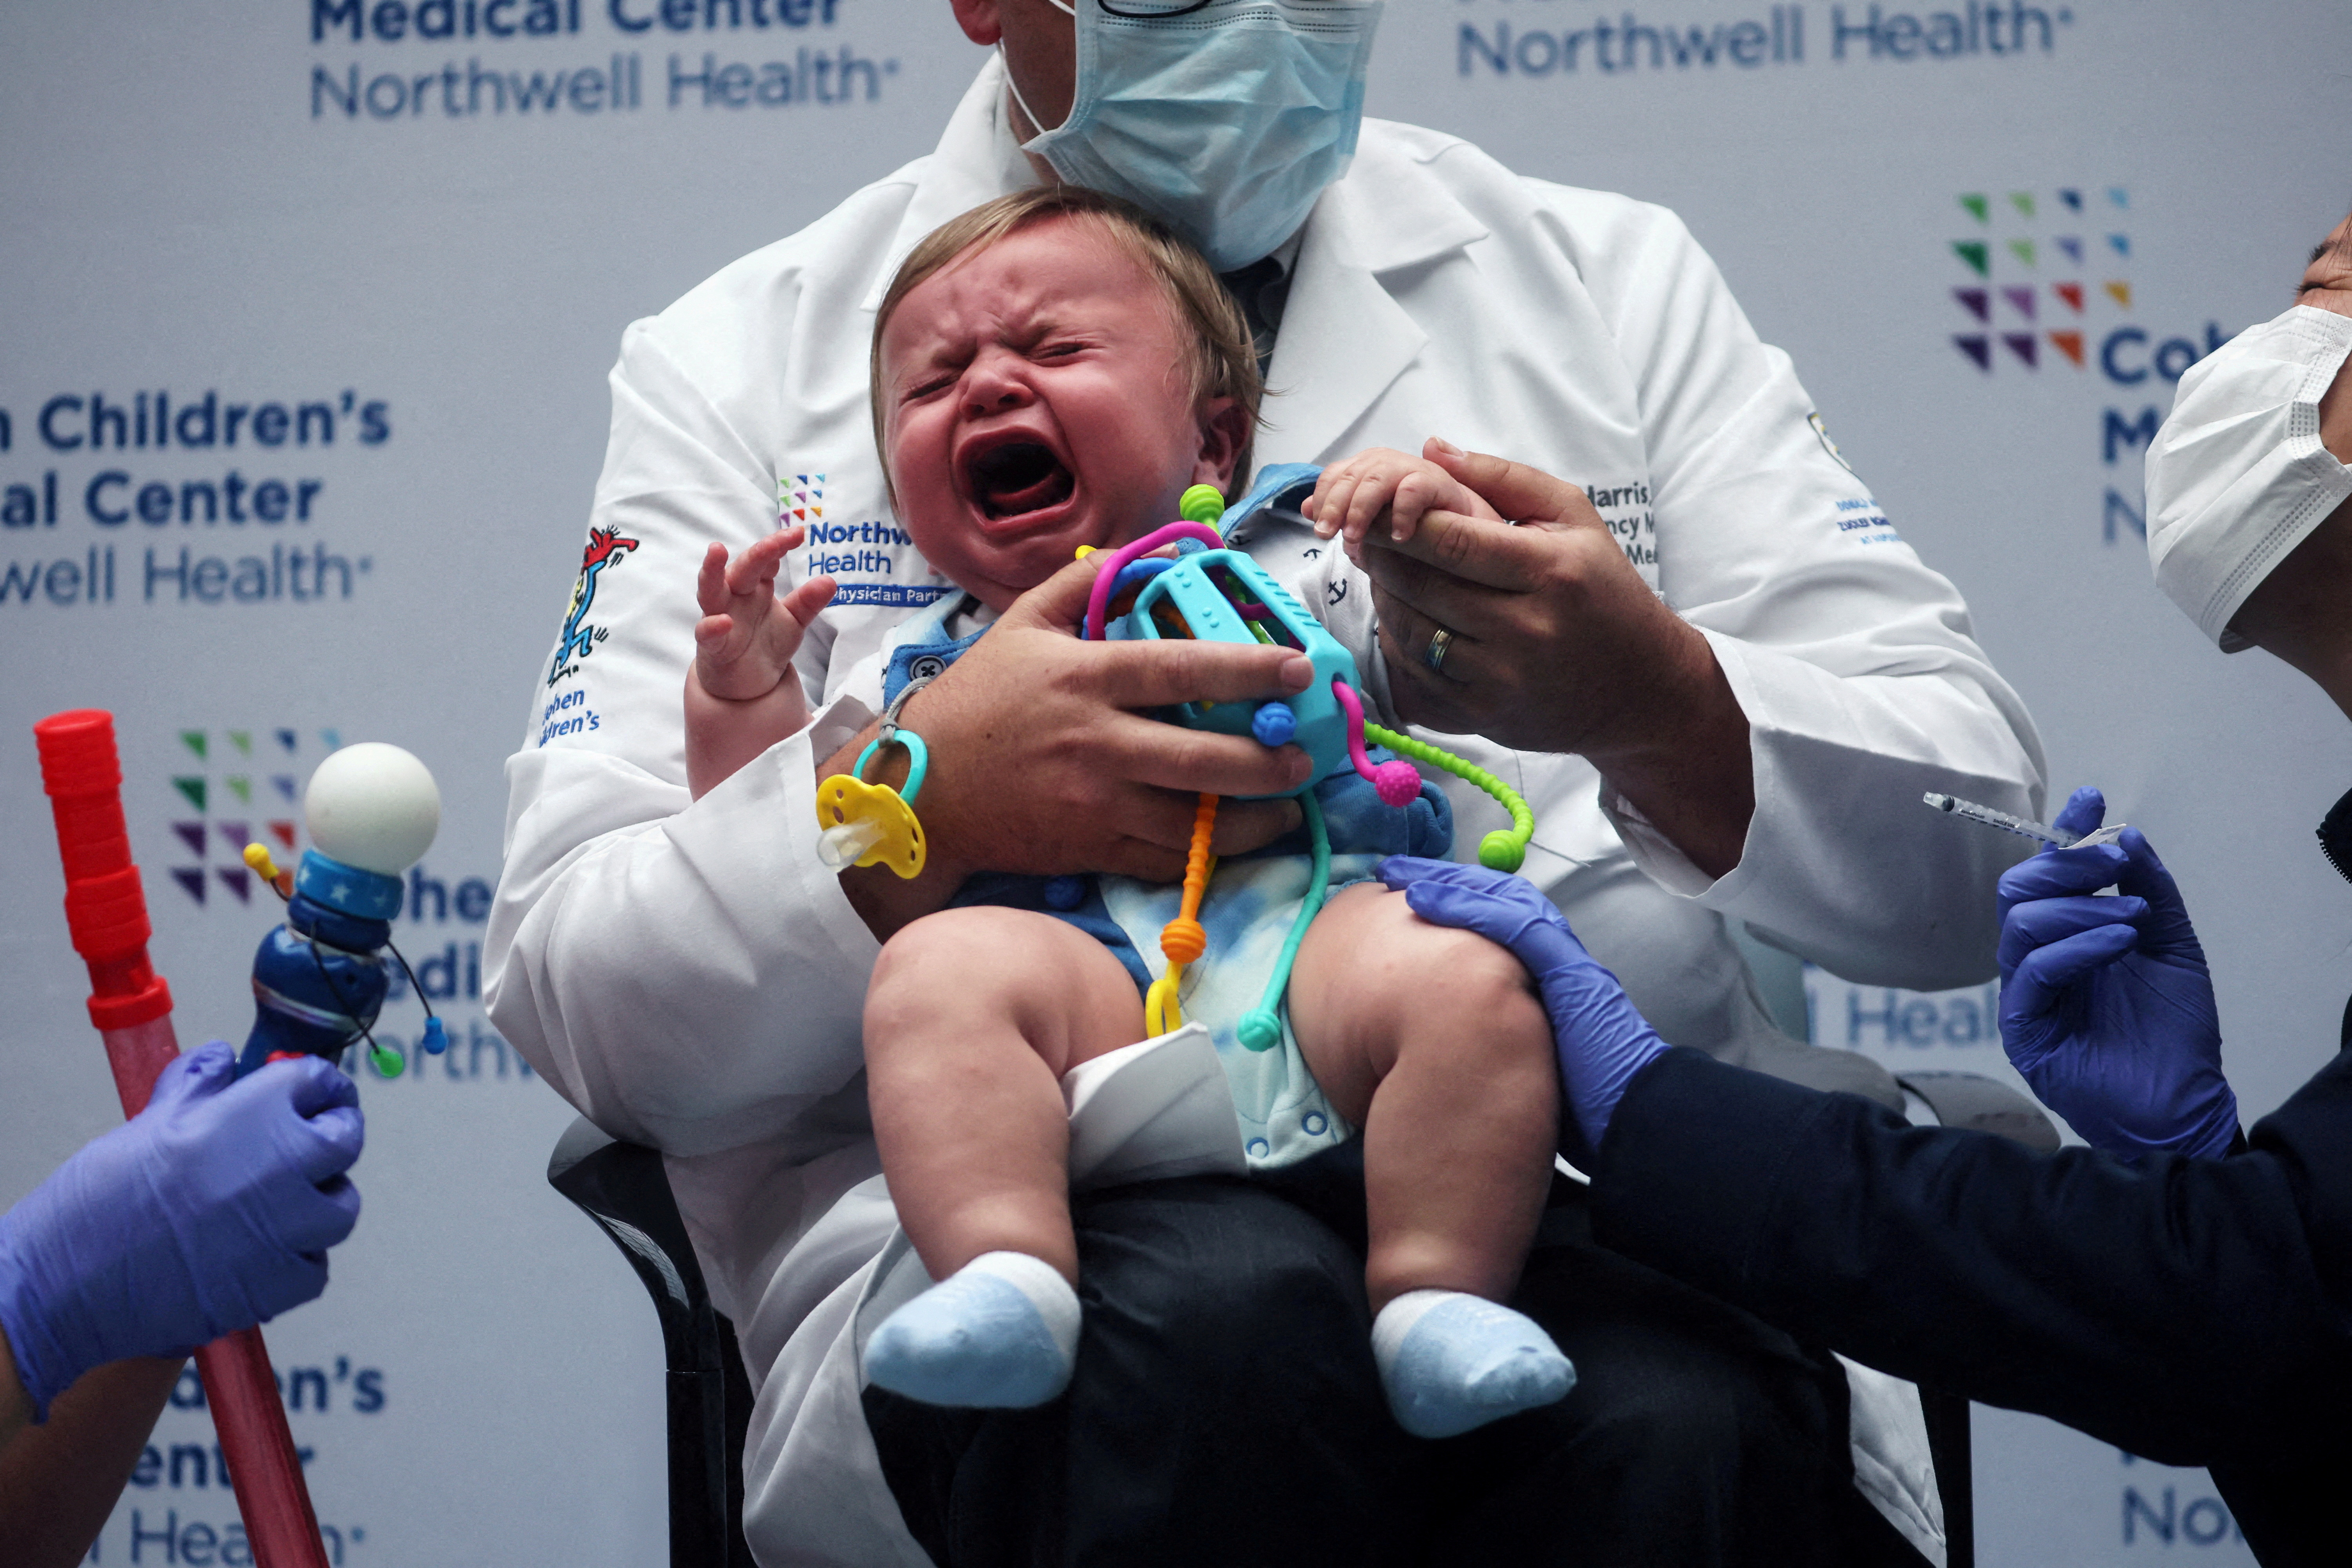 Oliver Harris, 9 months, cries after receiving a vaccine against the coronavirus disease (COVID-19) at Northwell Health's Cohen Children's Medical Center in New Hyde Park, New York